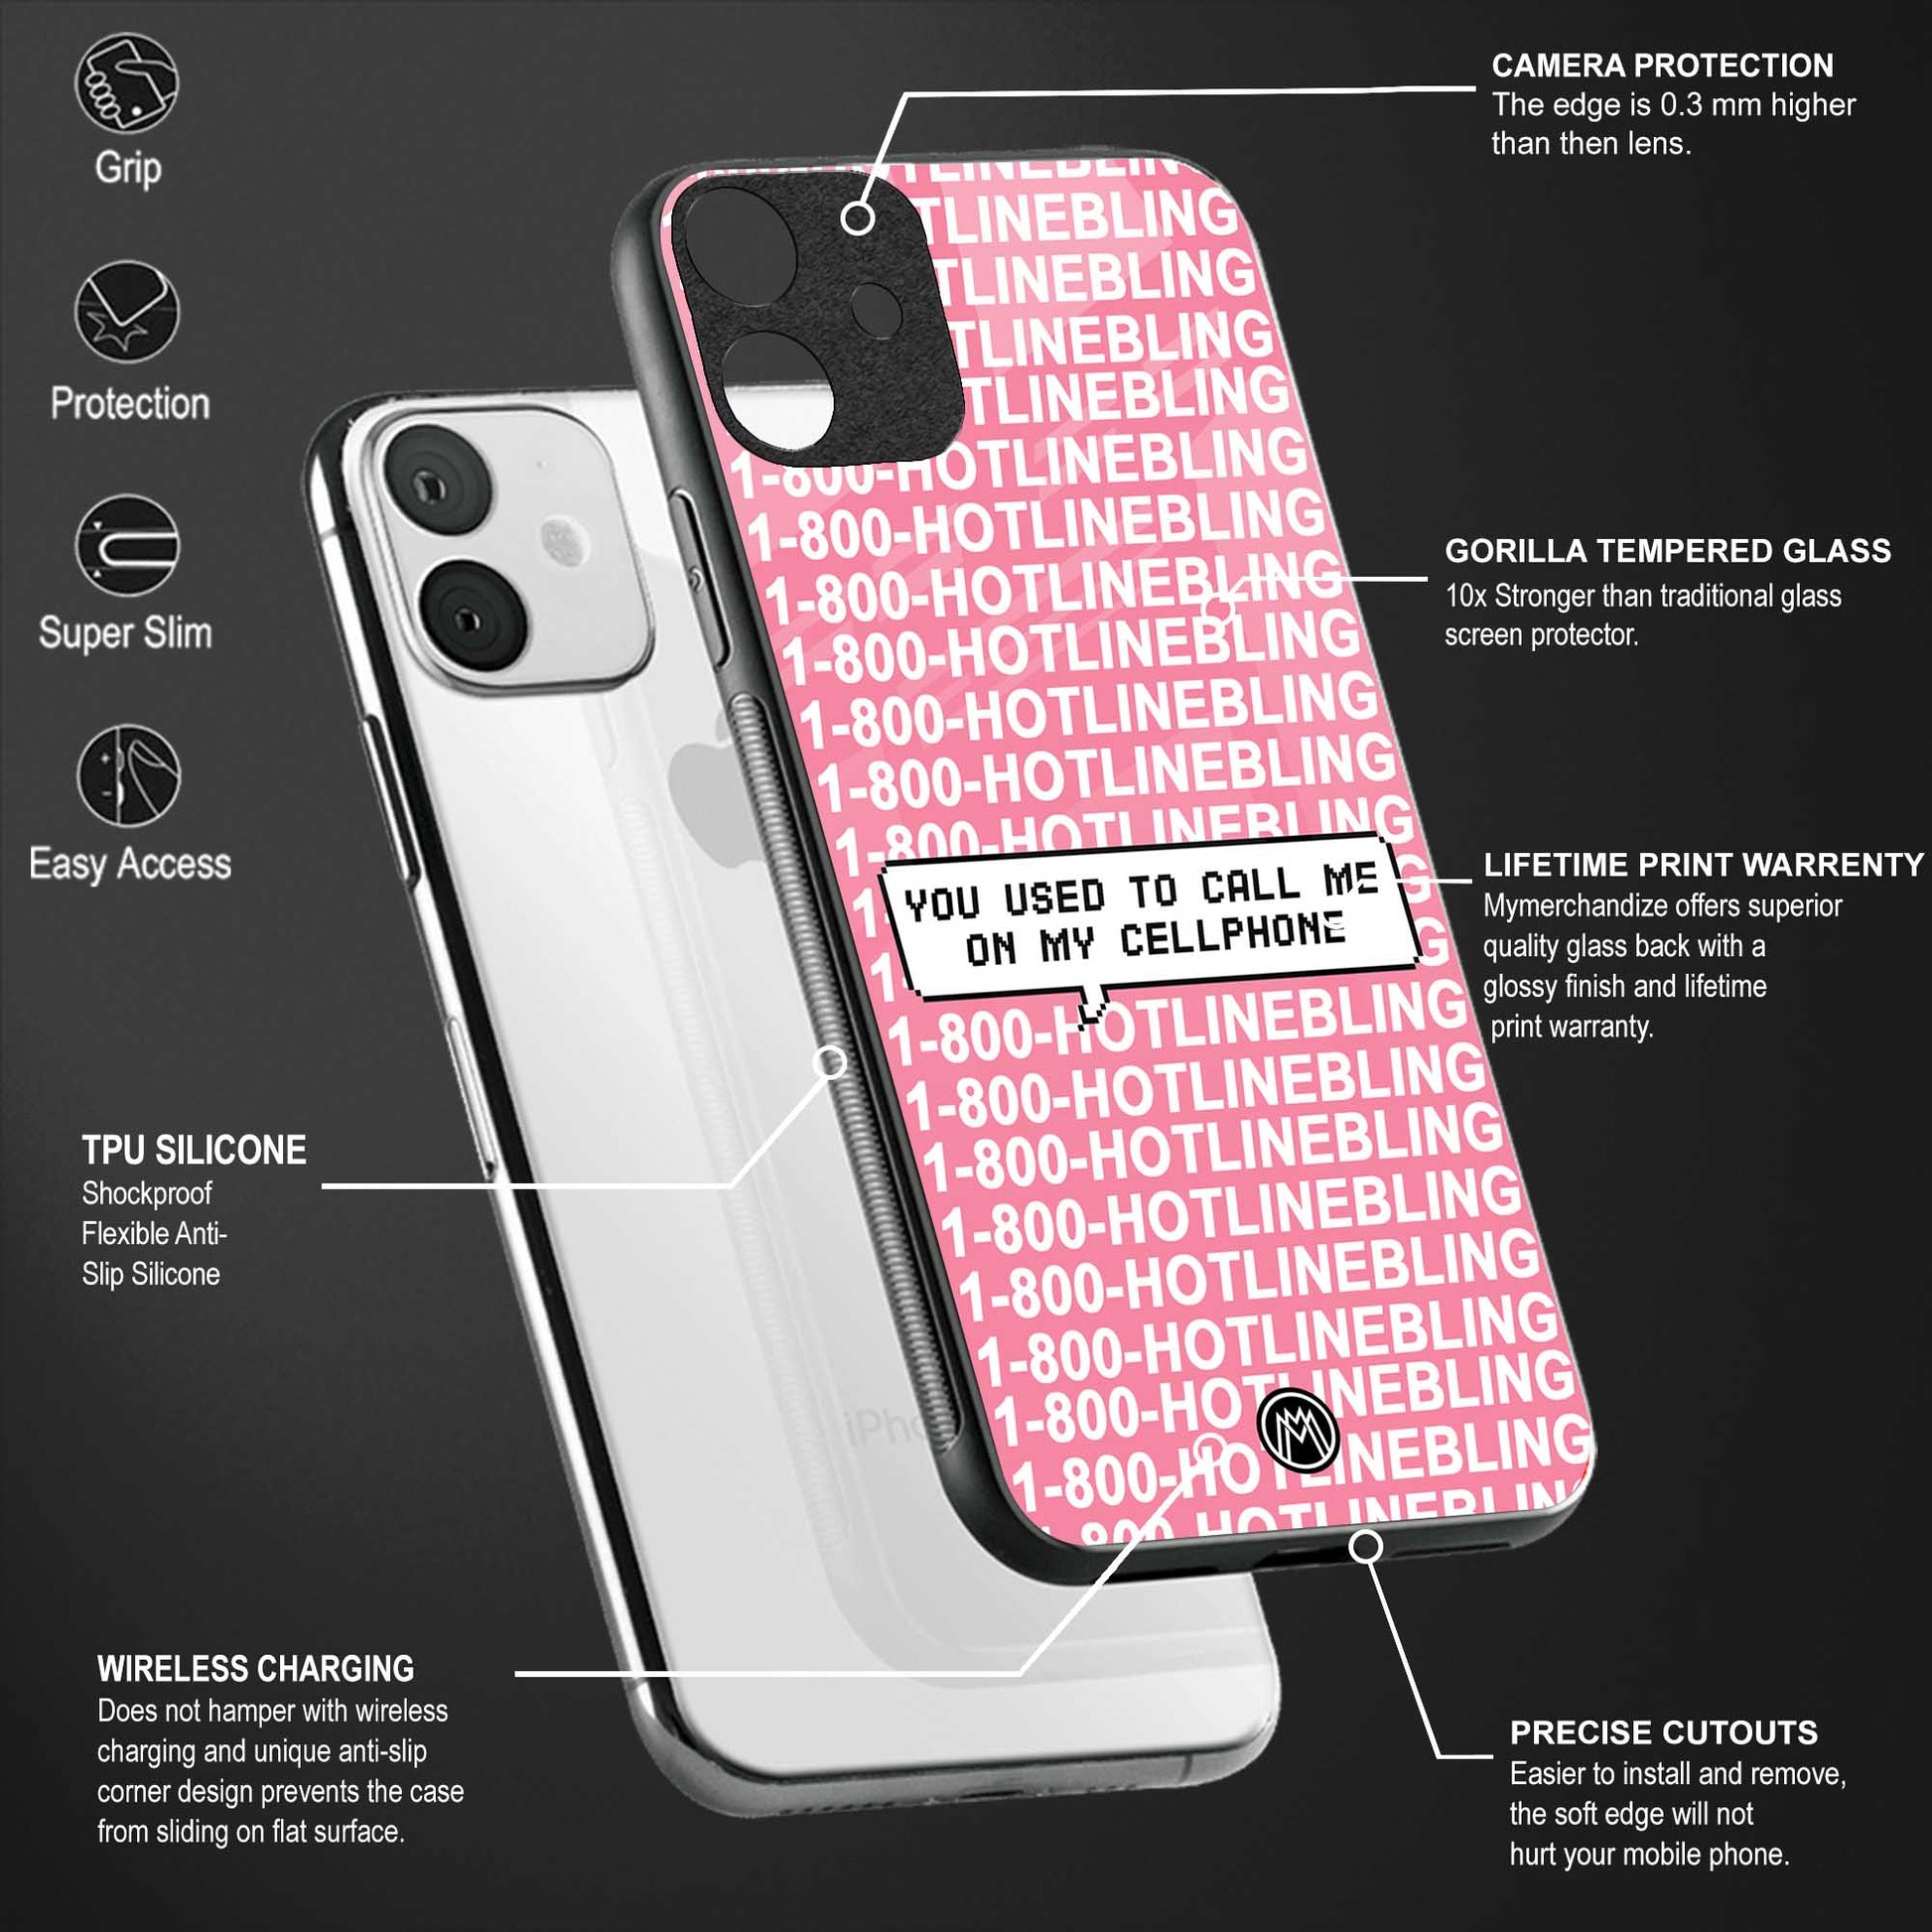 1800 hotline bling phone cover for realme 2 pro 